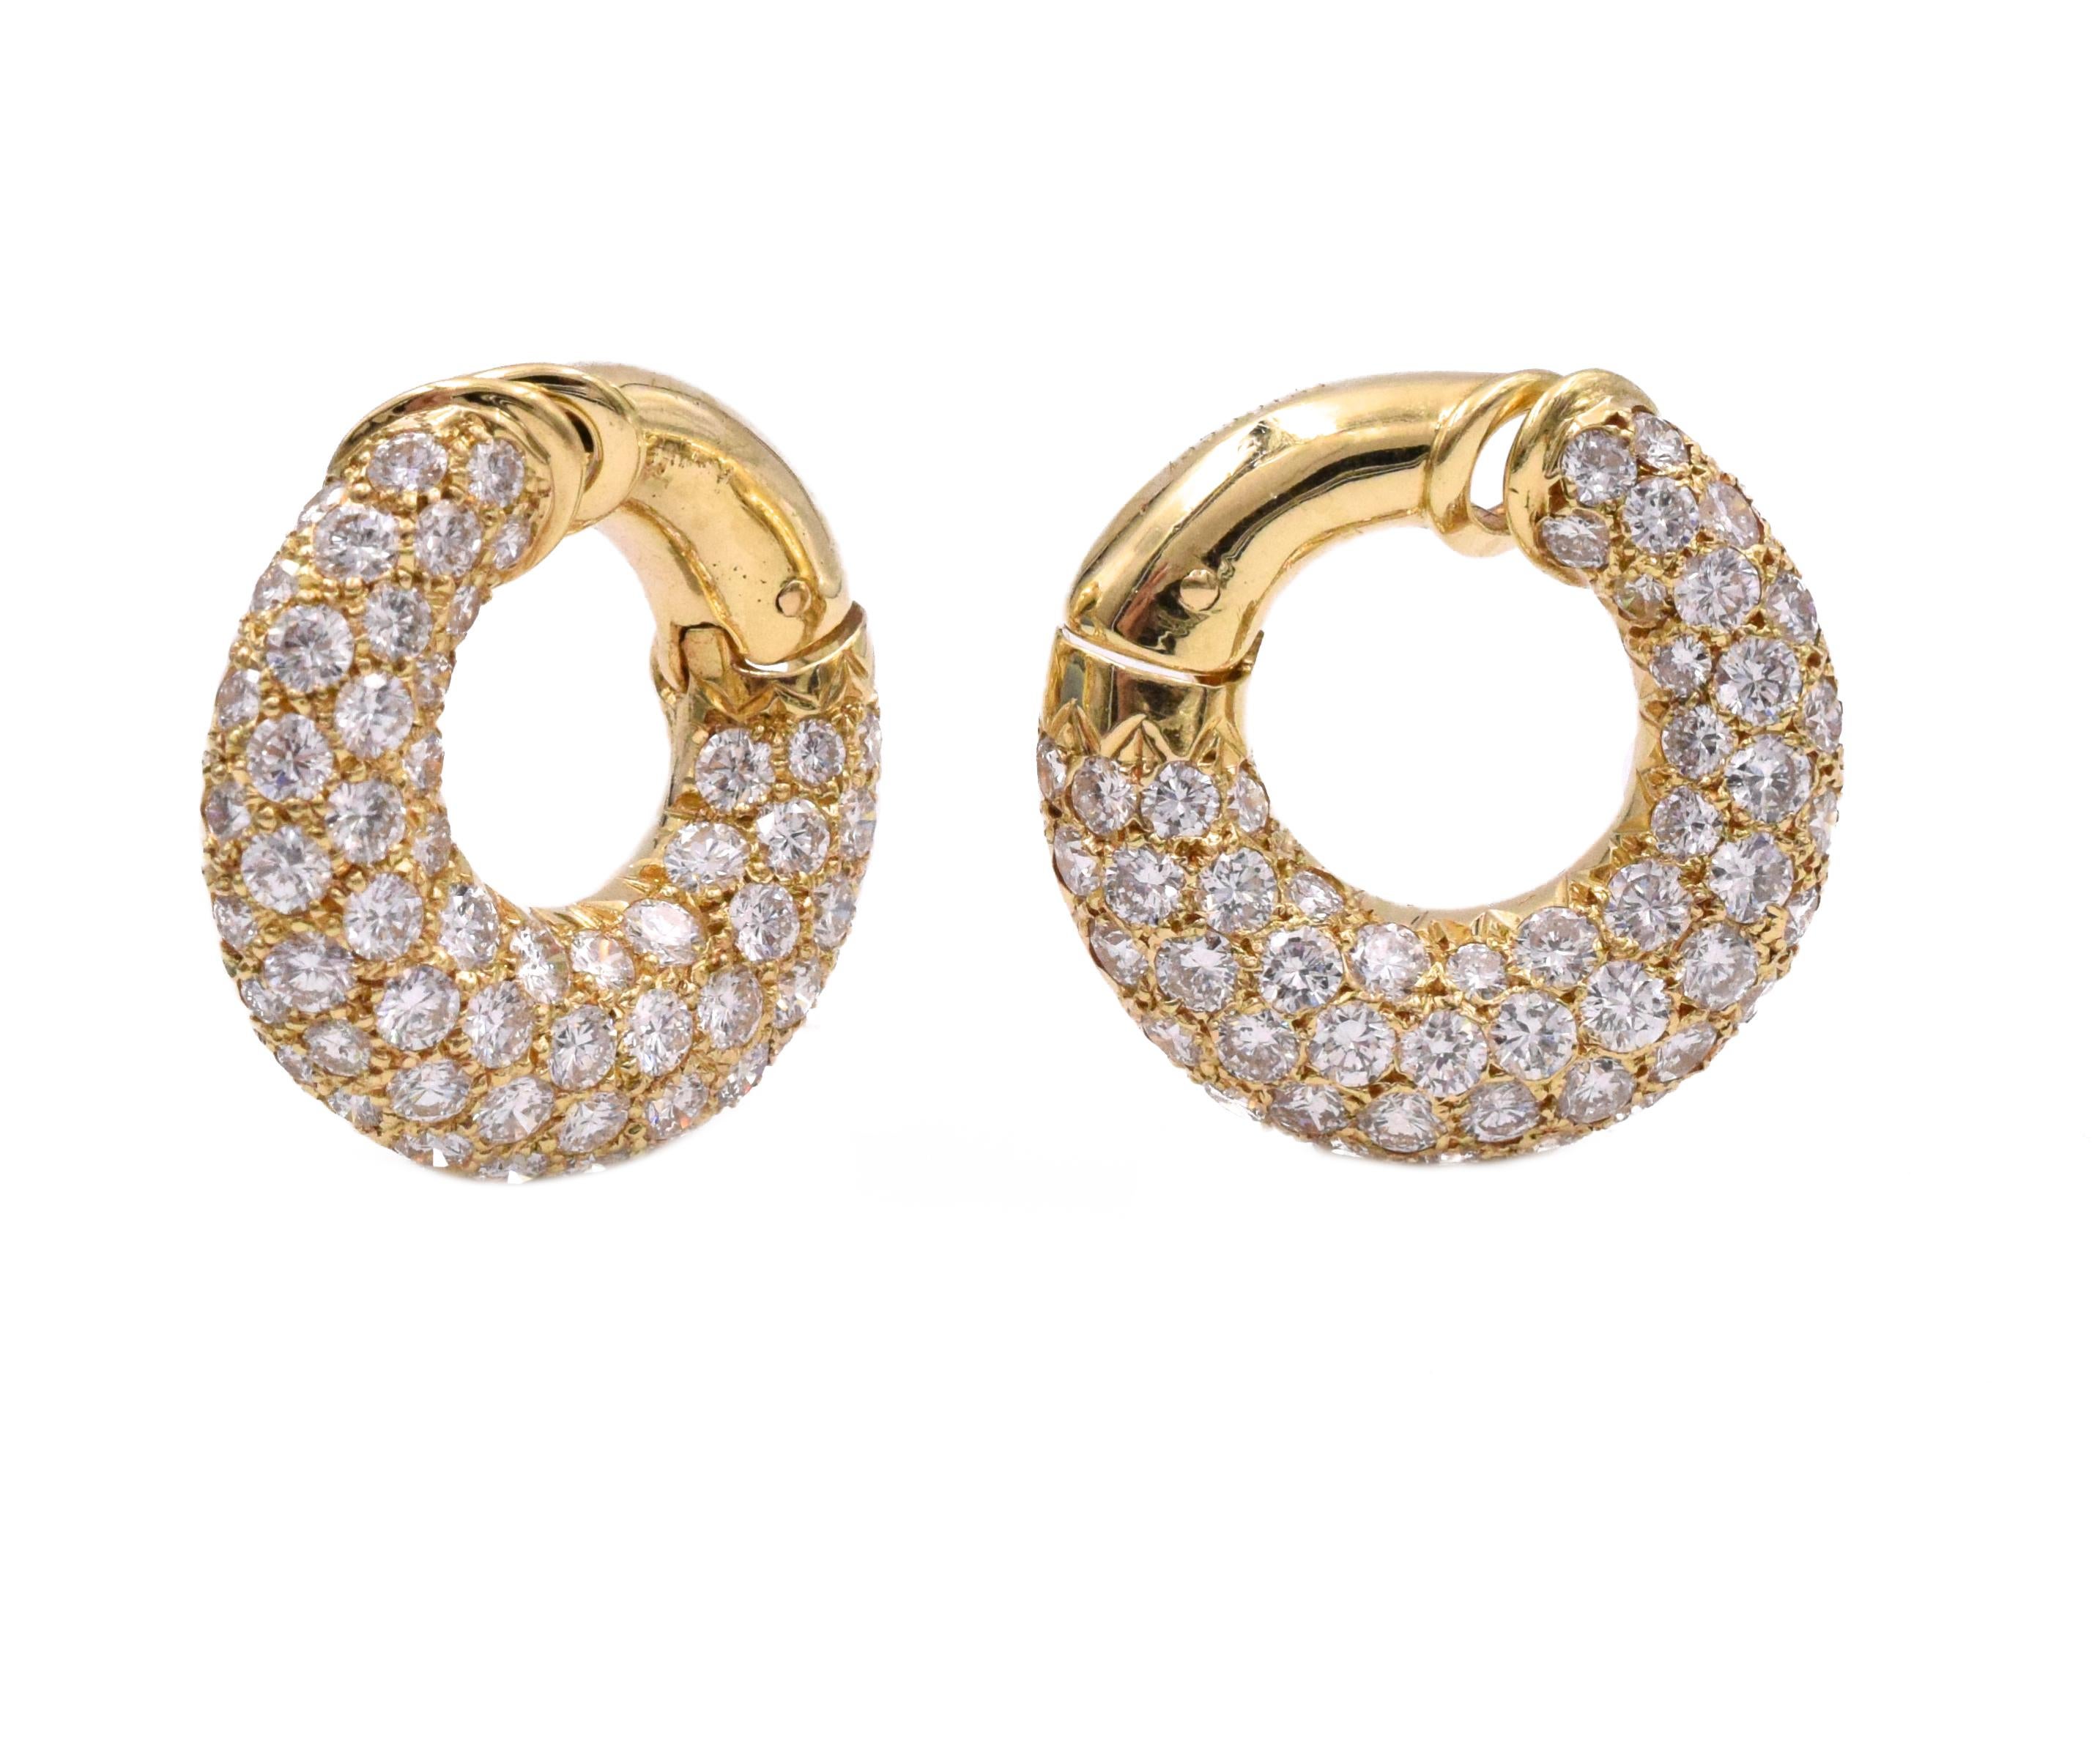 Pair of Gold and Diamond Hoop Earclips, Van Cleef & Arpels, France. The bombé hoops pavé- set with 116 round diamonds approximately 7.00 cts, color F-G, clarity VS. 
Signed VCA, 79, no. xxxxxx CS, 
with maker's marks and French assay marks. 